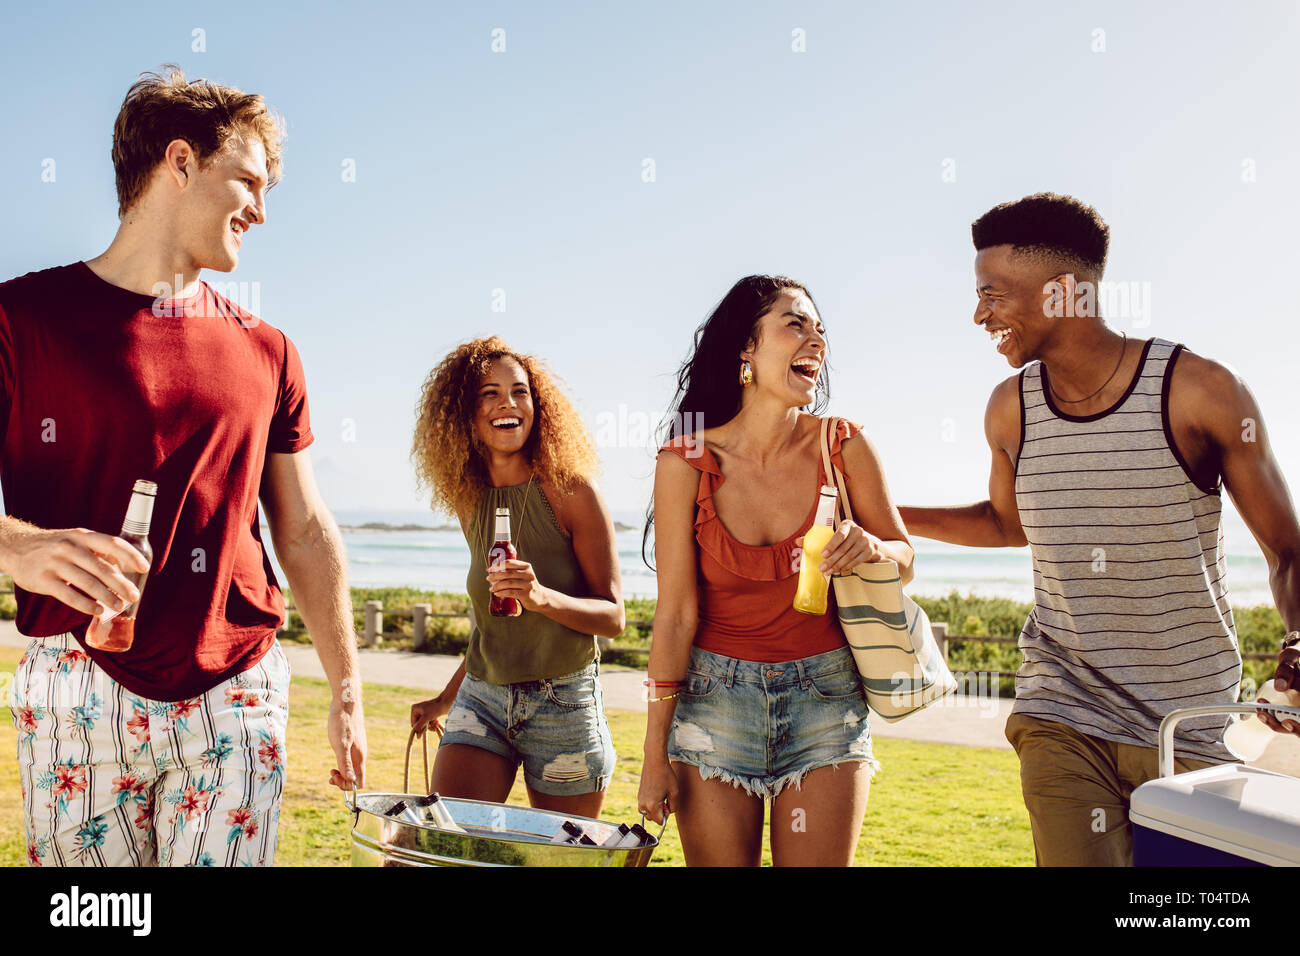 Friends summer beach party. Group of multi-ethnic men and woman together at the beach having fun. Stock Photo